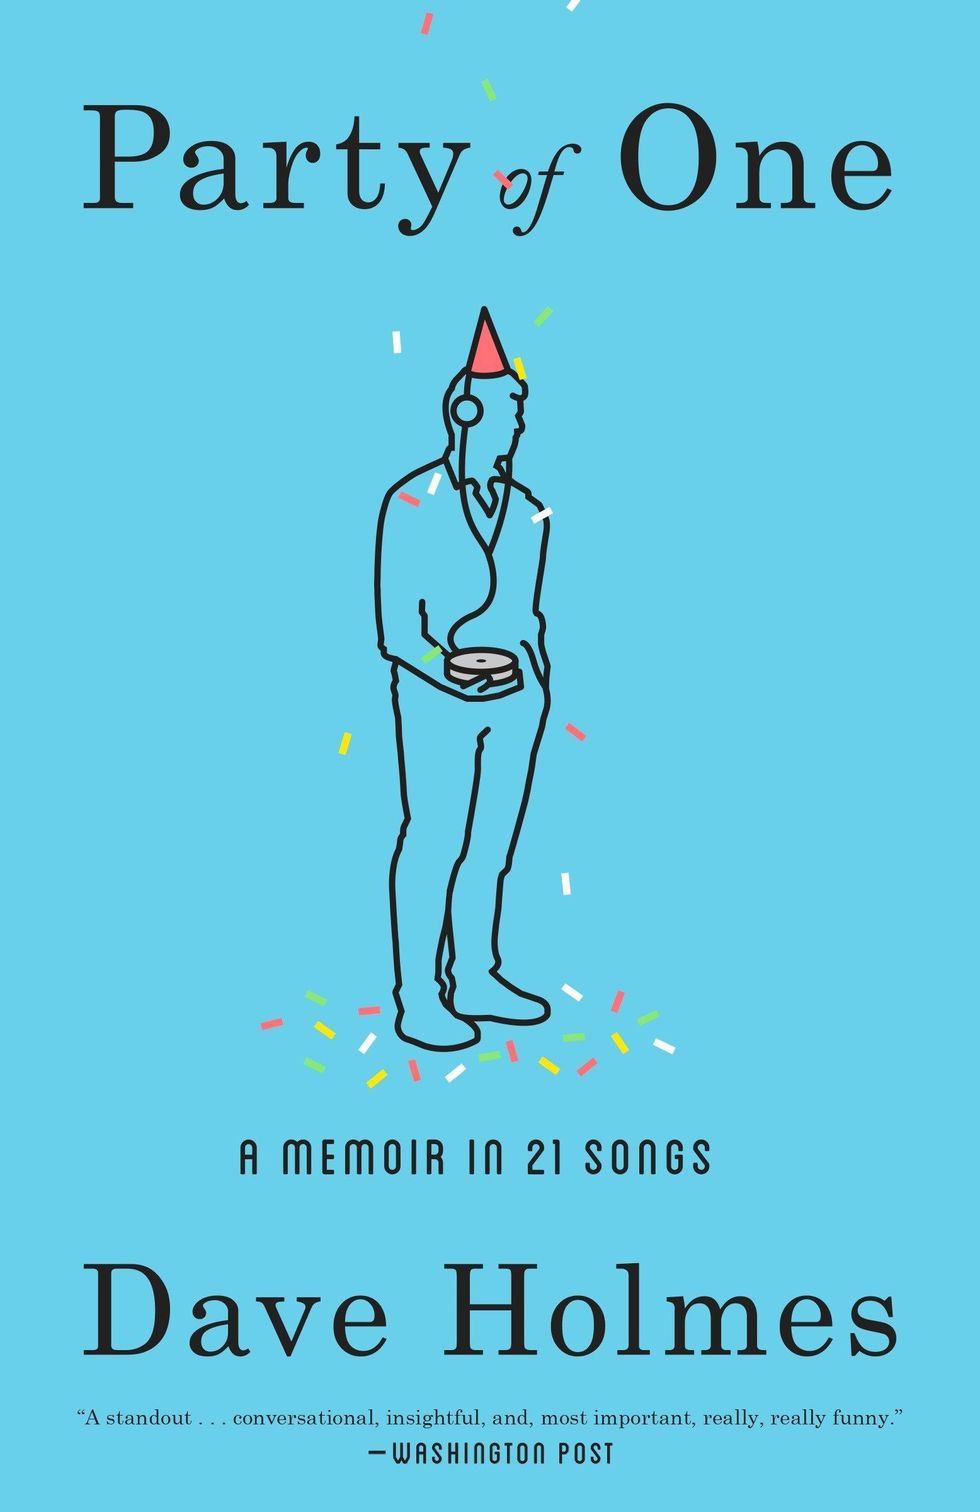 Party of One: A Memoir in 21 Songs by Dave Holmes (2016)